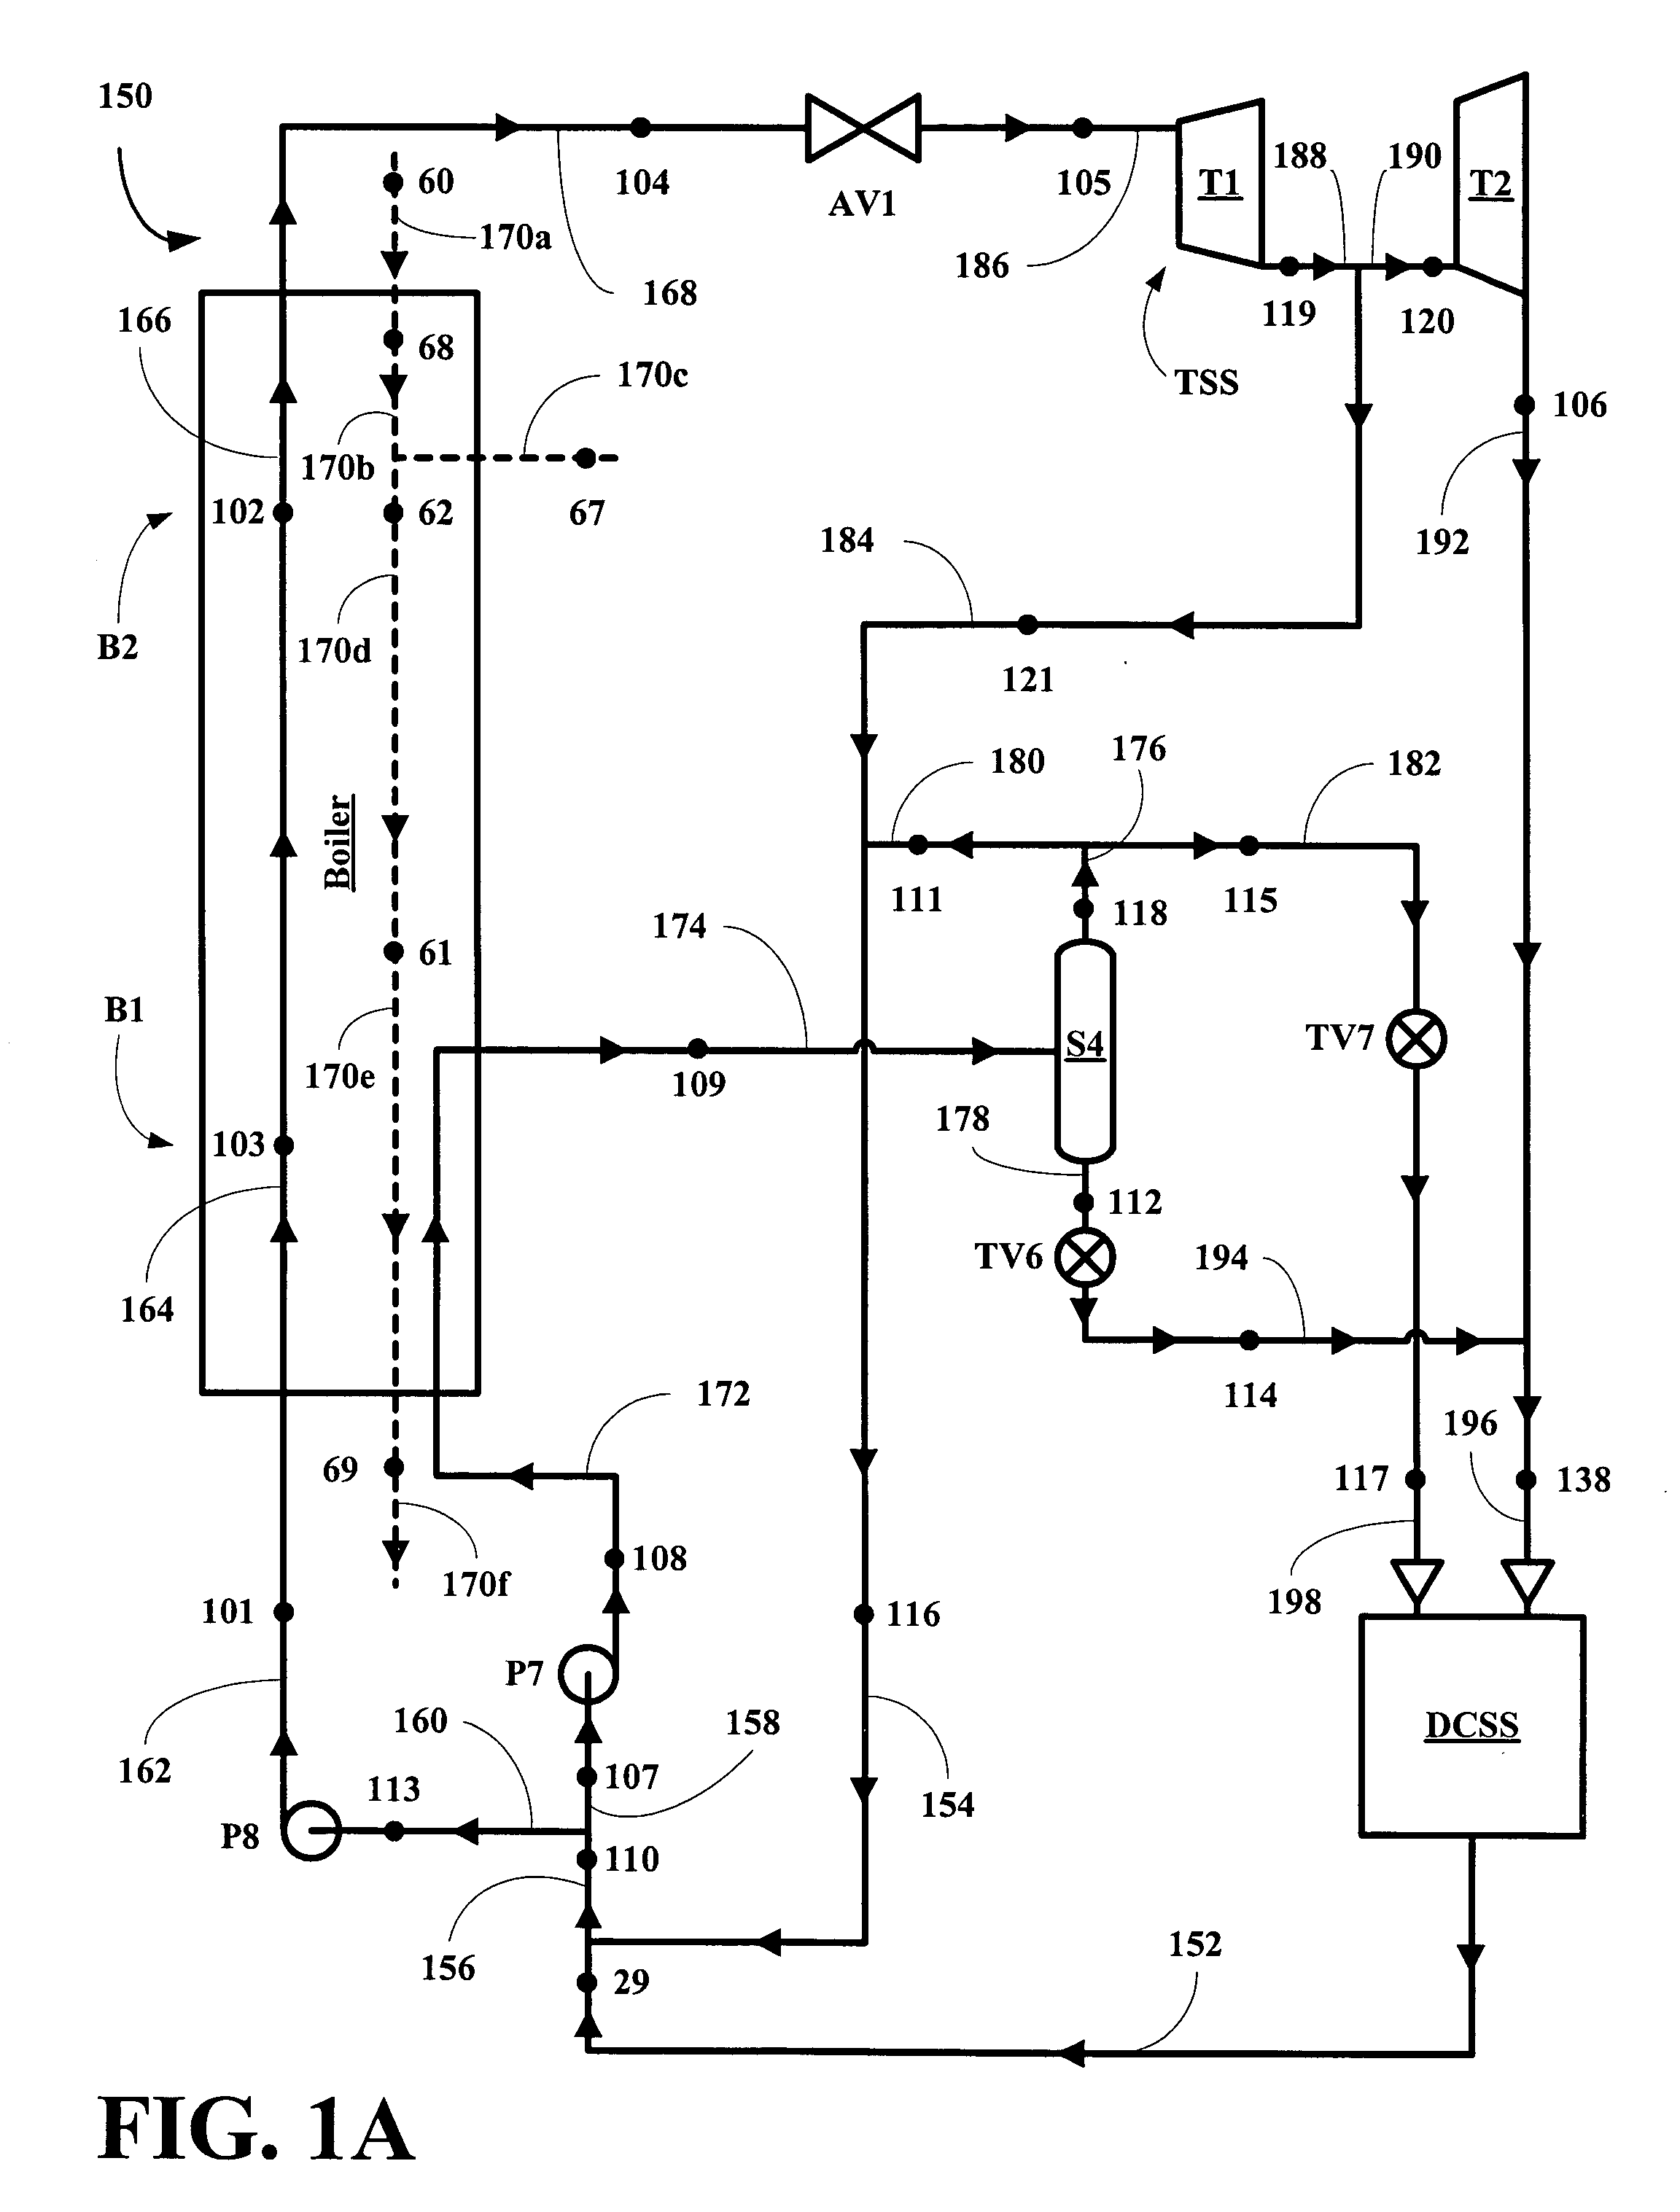 Power system and apparatus for utilizing waste heat